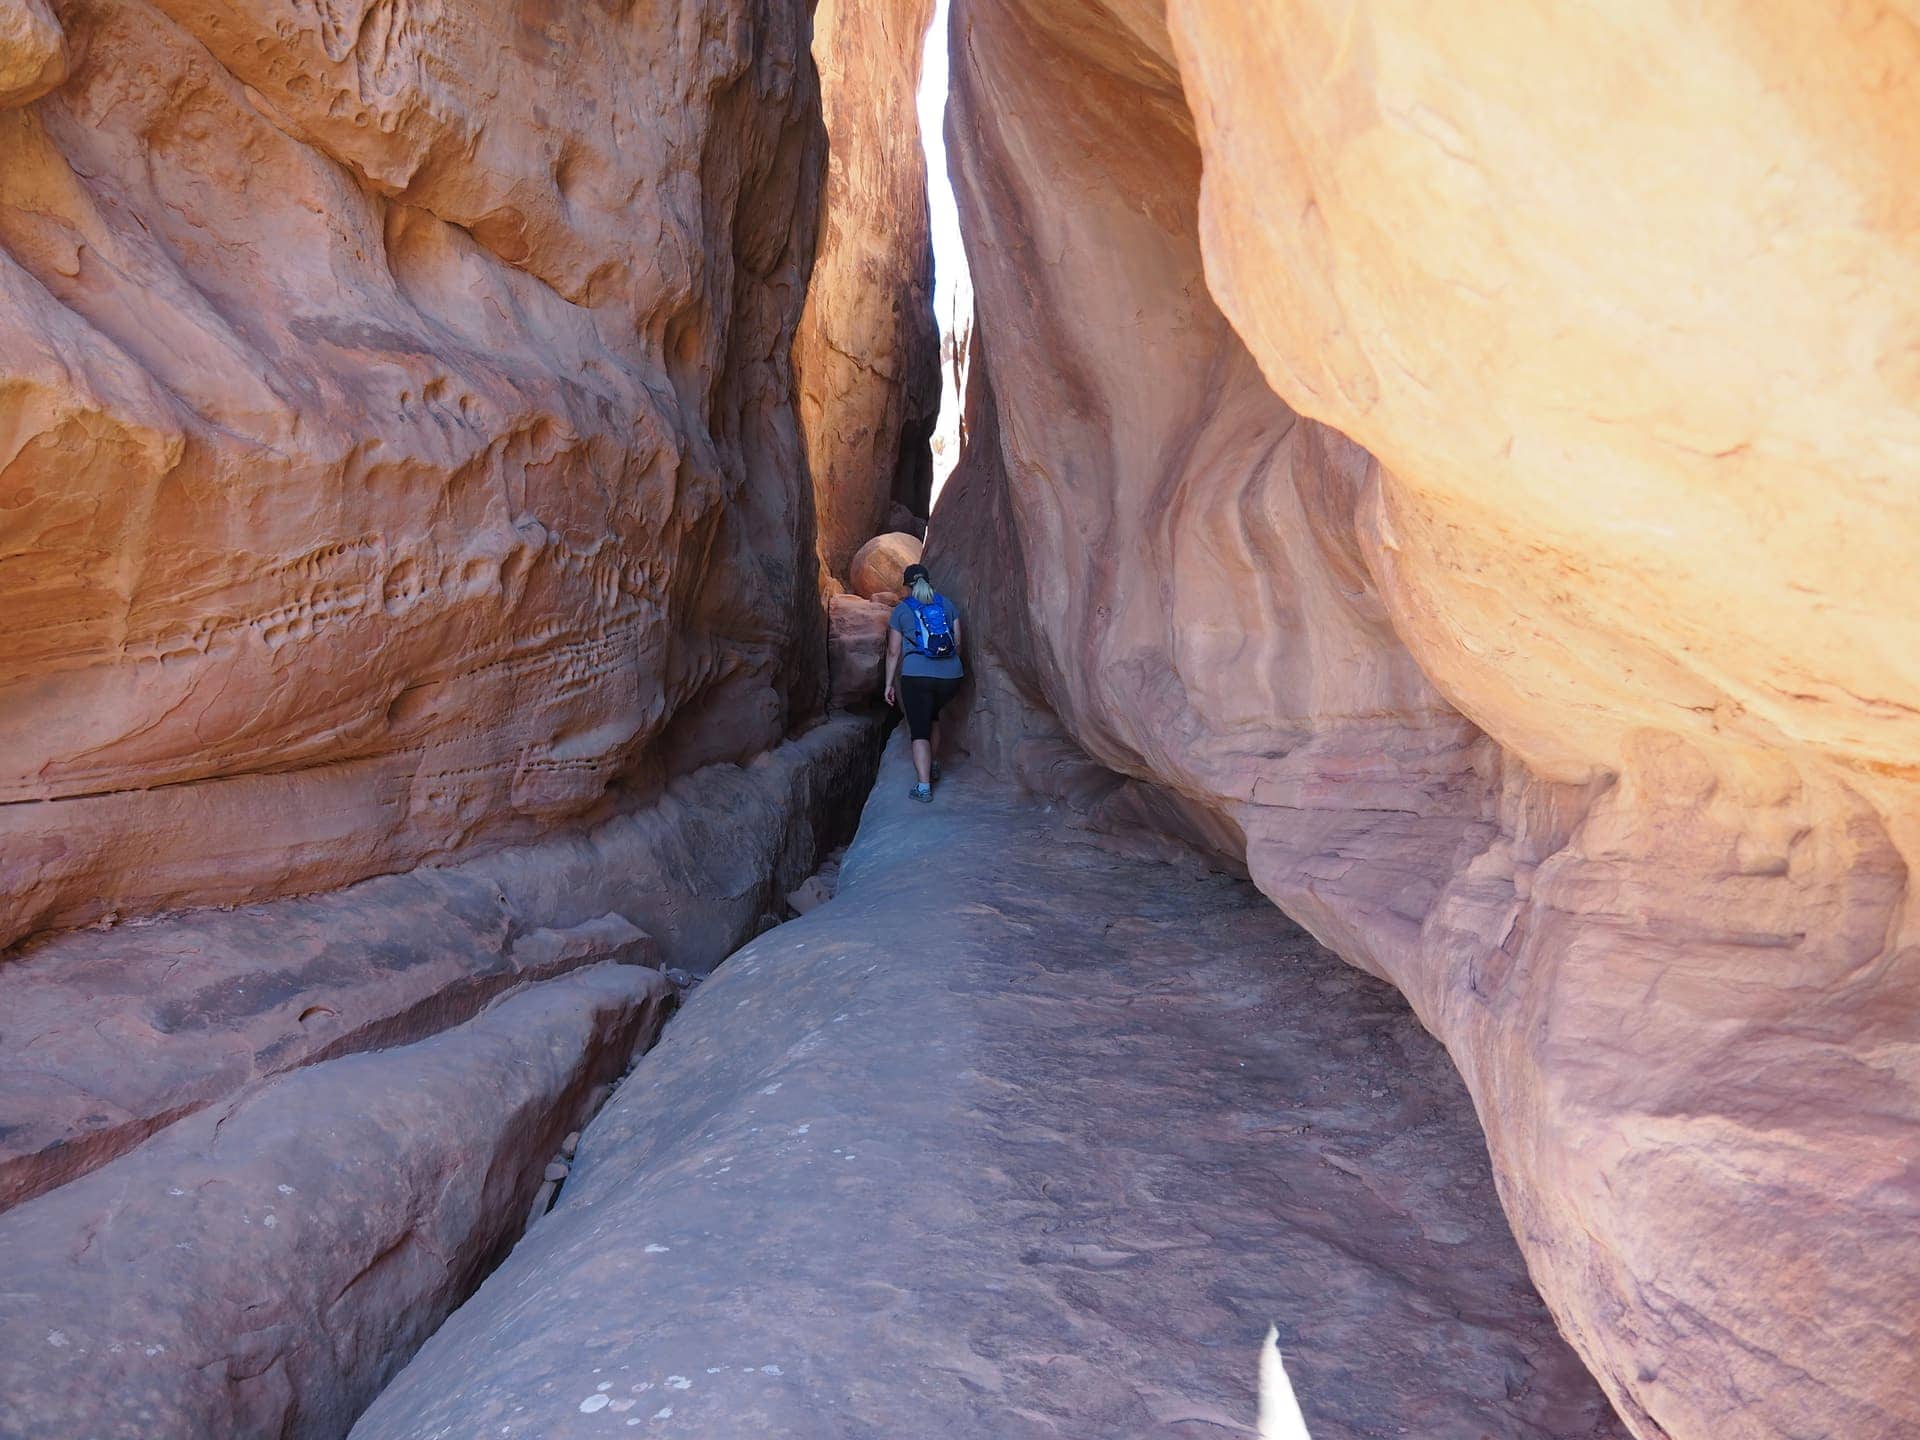 Lindsey made her way toward the end of the Fiery Furnace